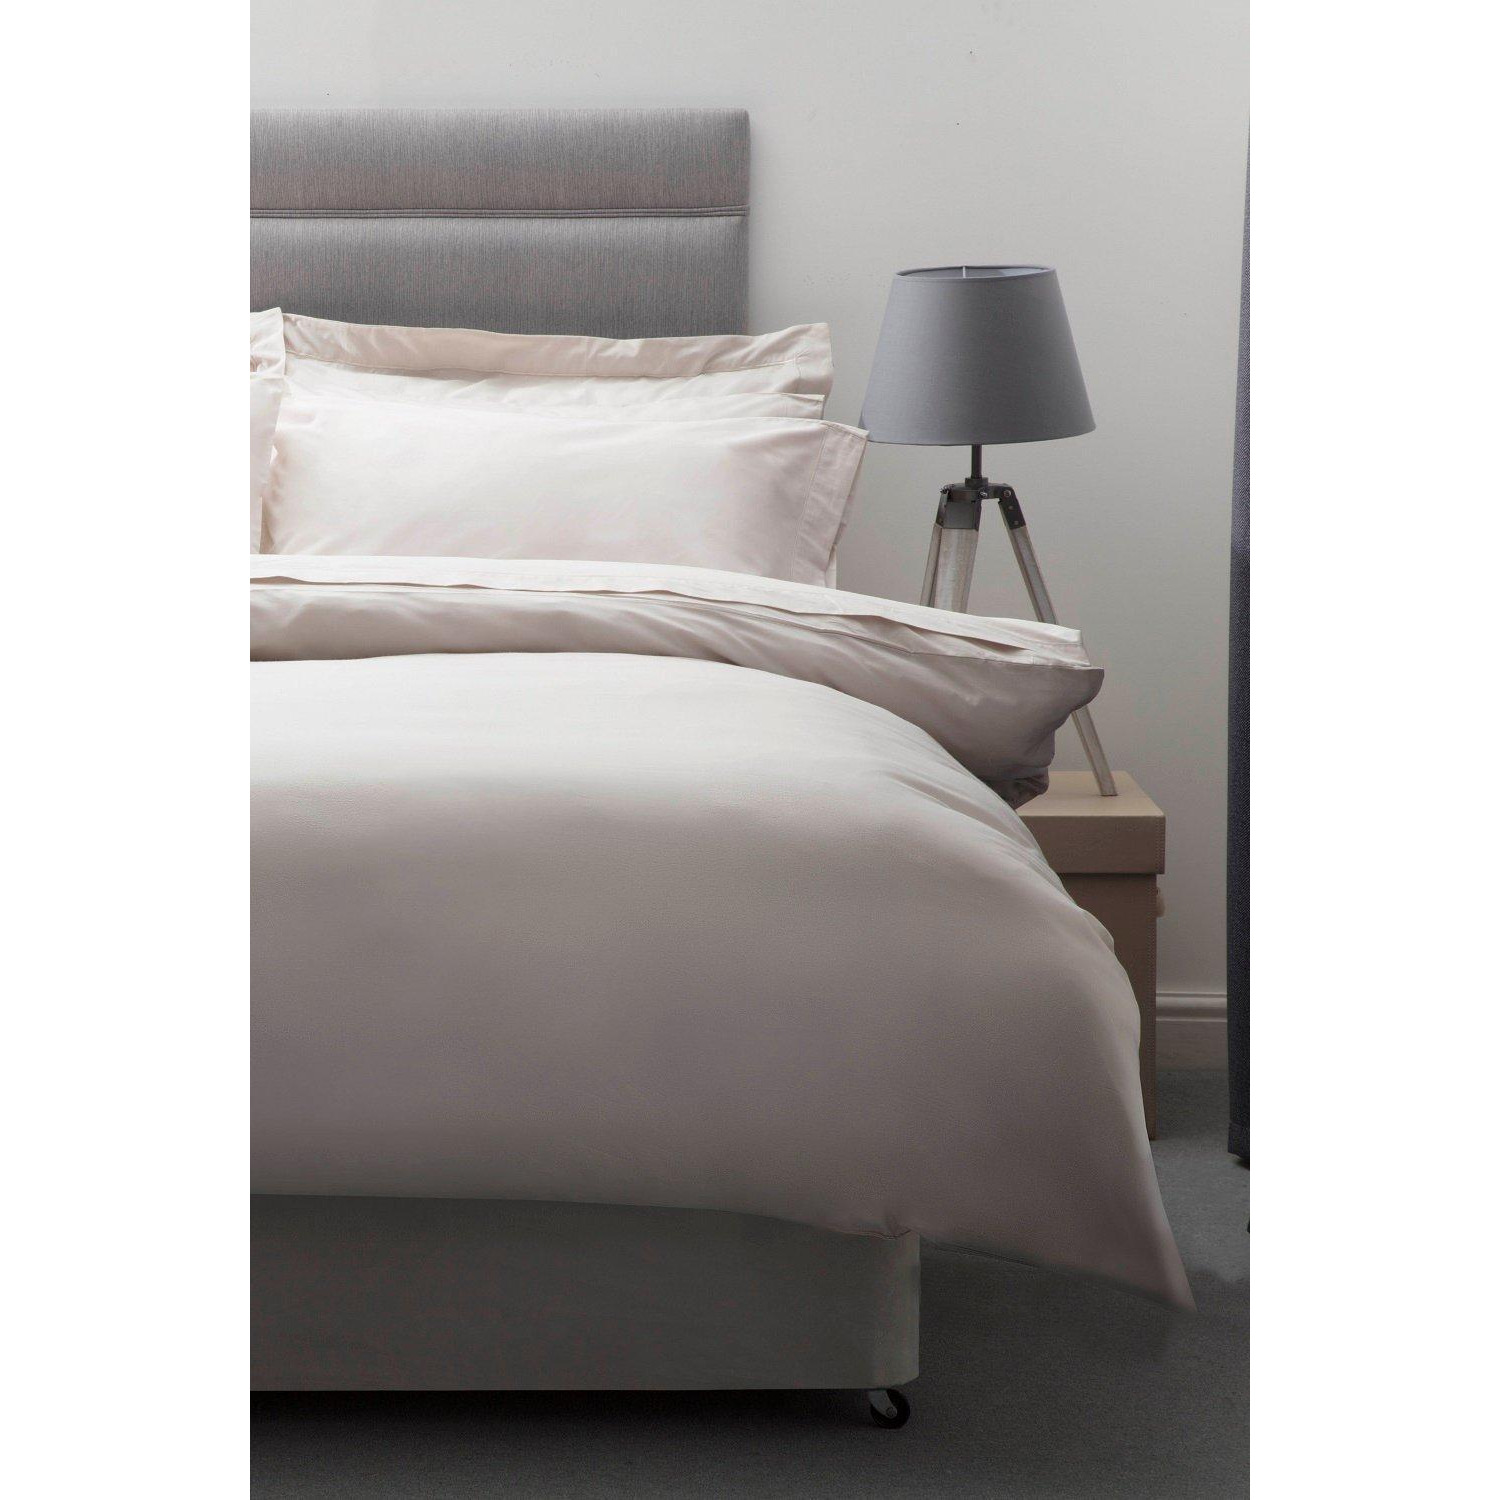 Egyptian Cotton 200 Thread Count Duvet Cover - image 1